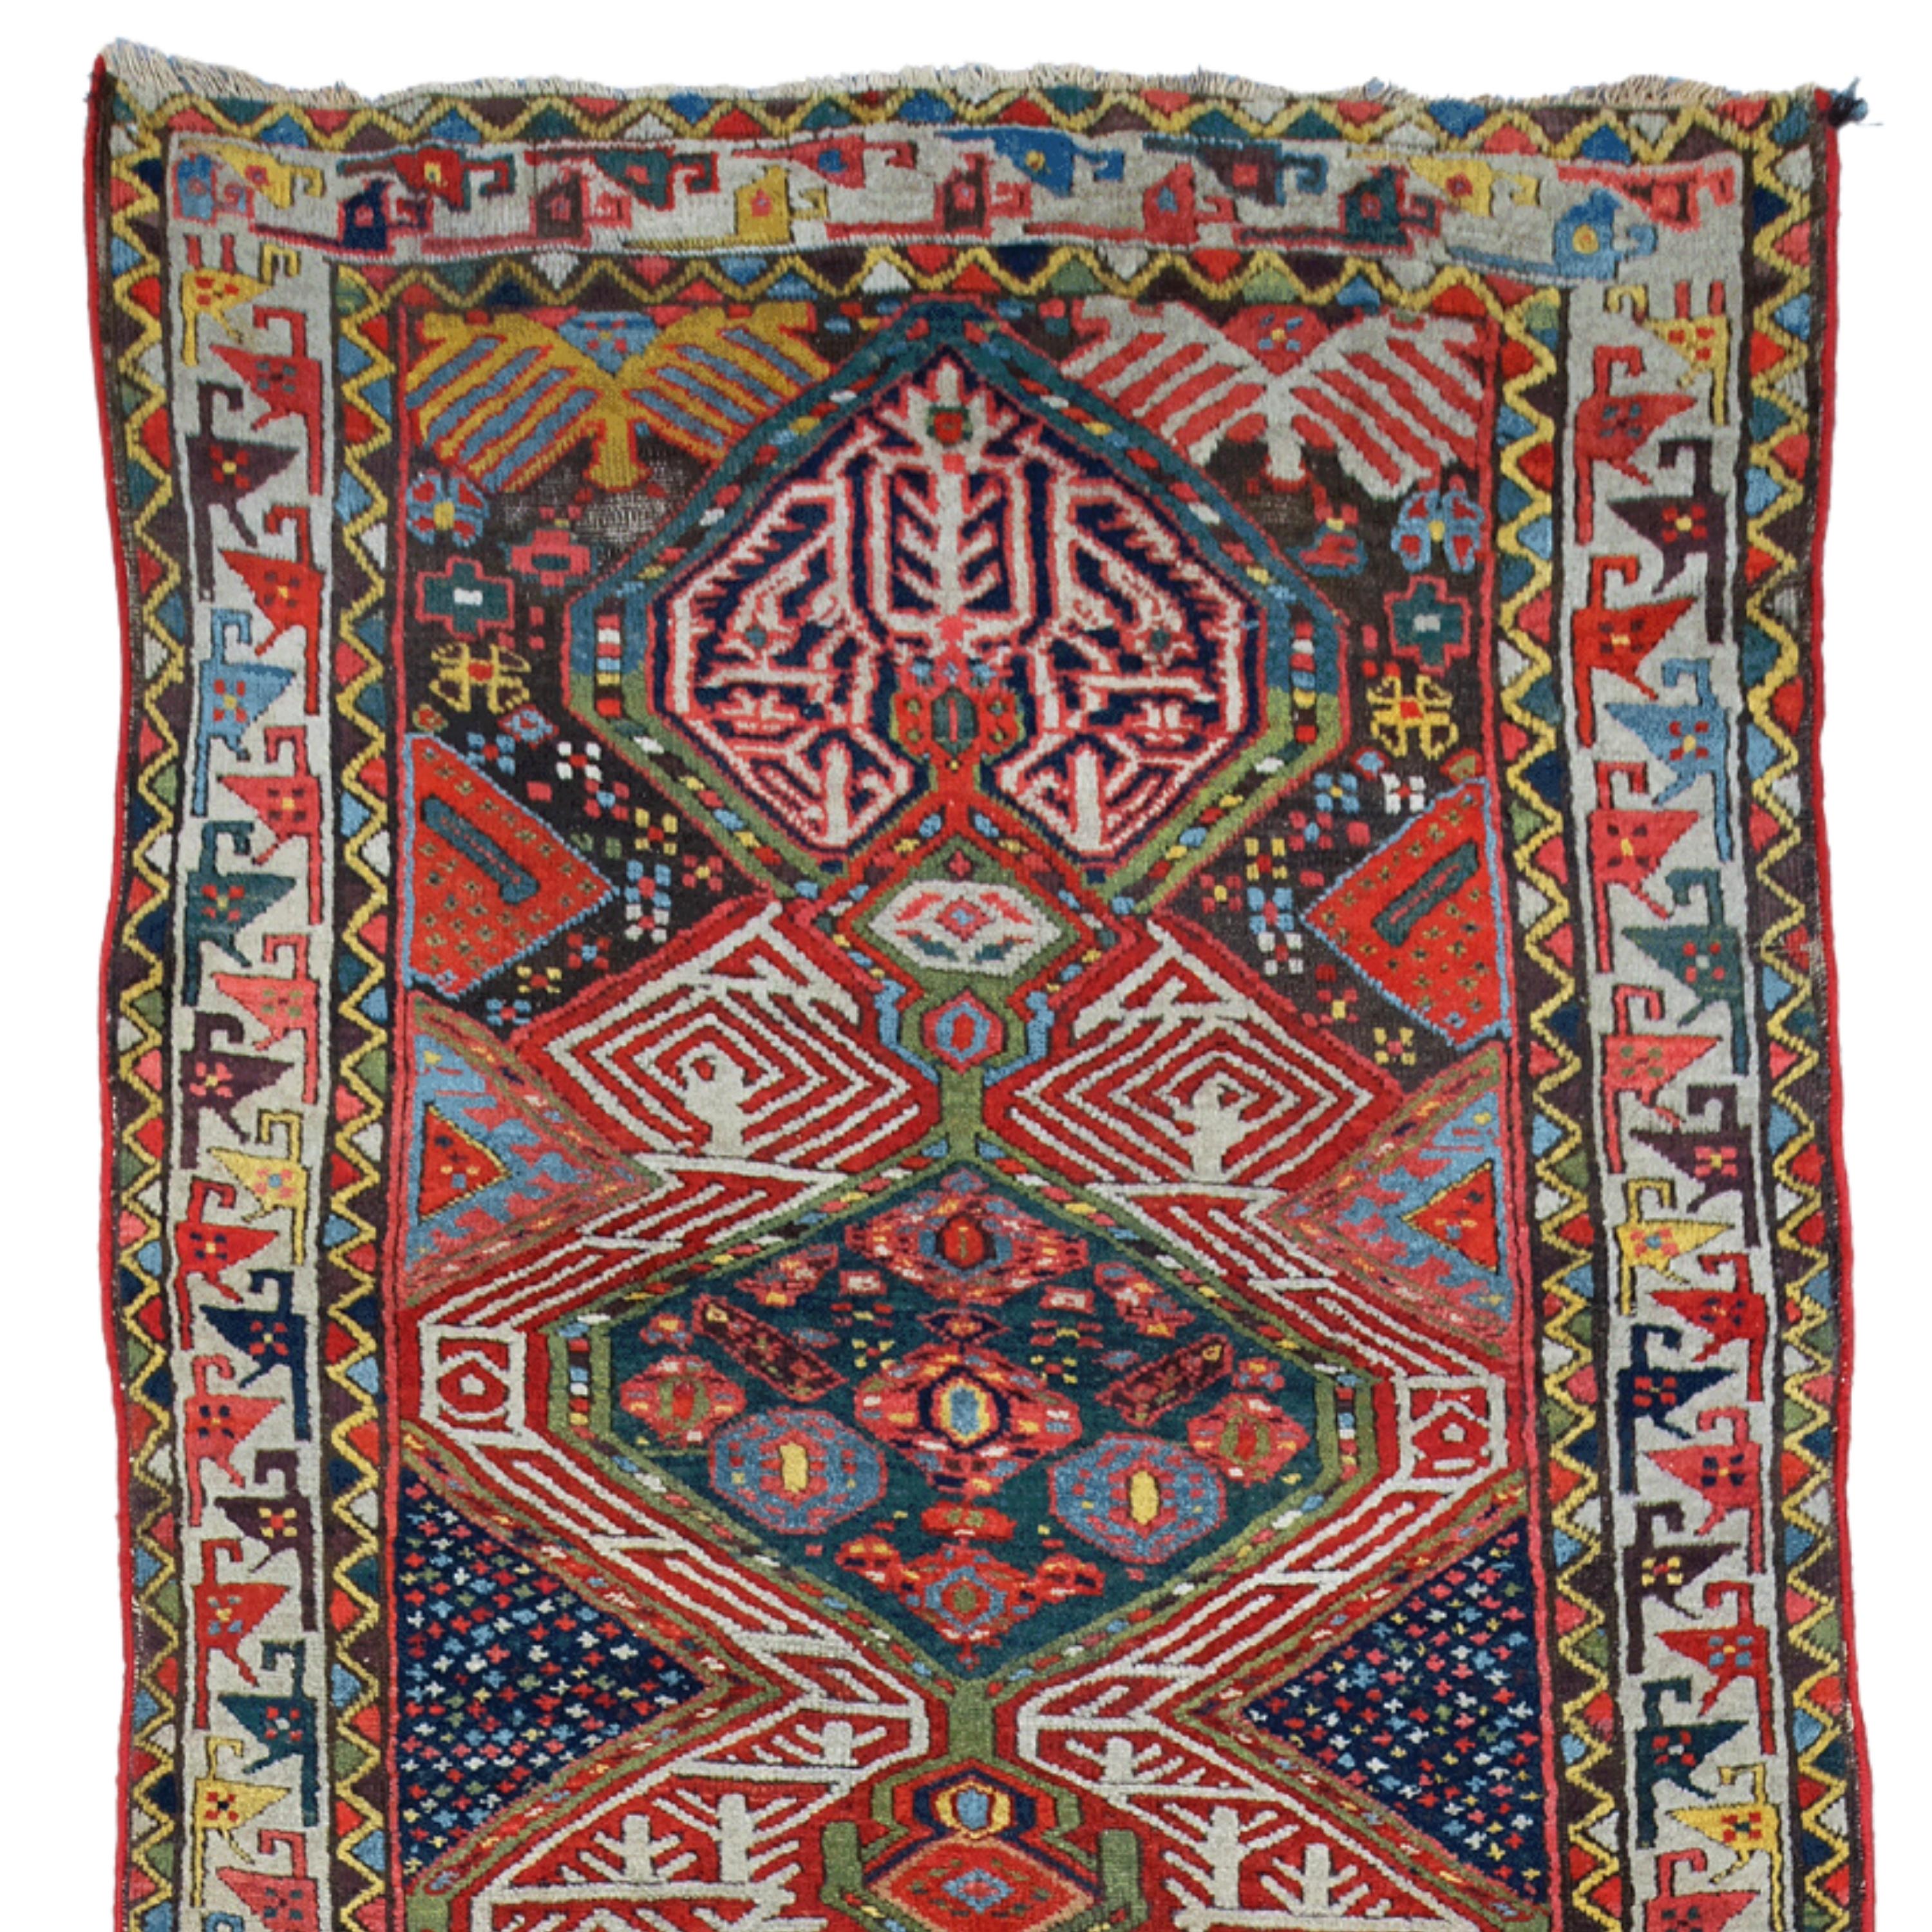 This exquisite antique Shahsevan runner is a masterpiece that showcases the artistic richness and mastery of craftsmanship of the 19th century. This work, carefully woven with wool material, reflects the cultural diversity of its period. This